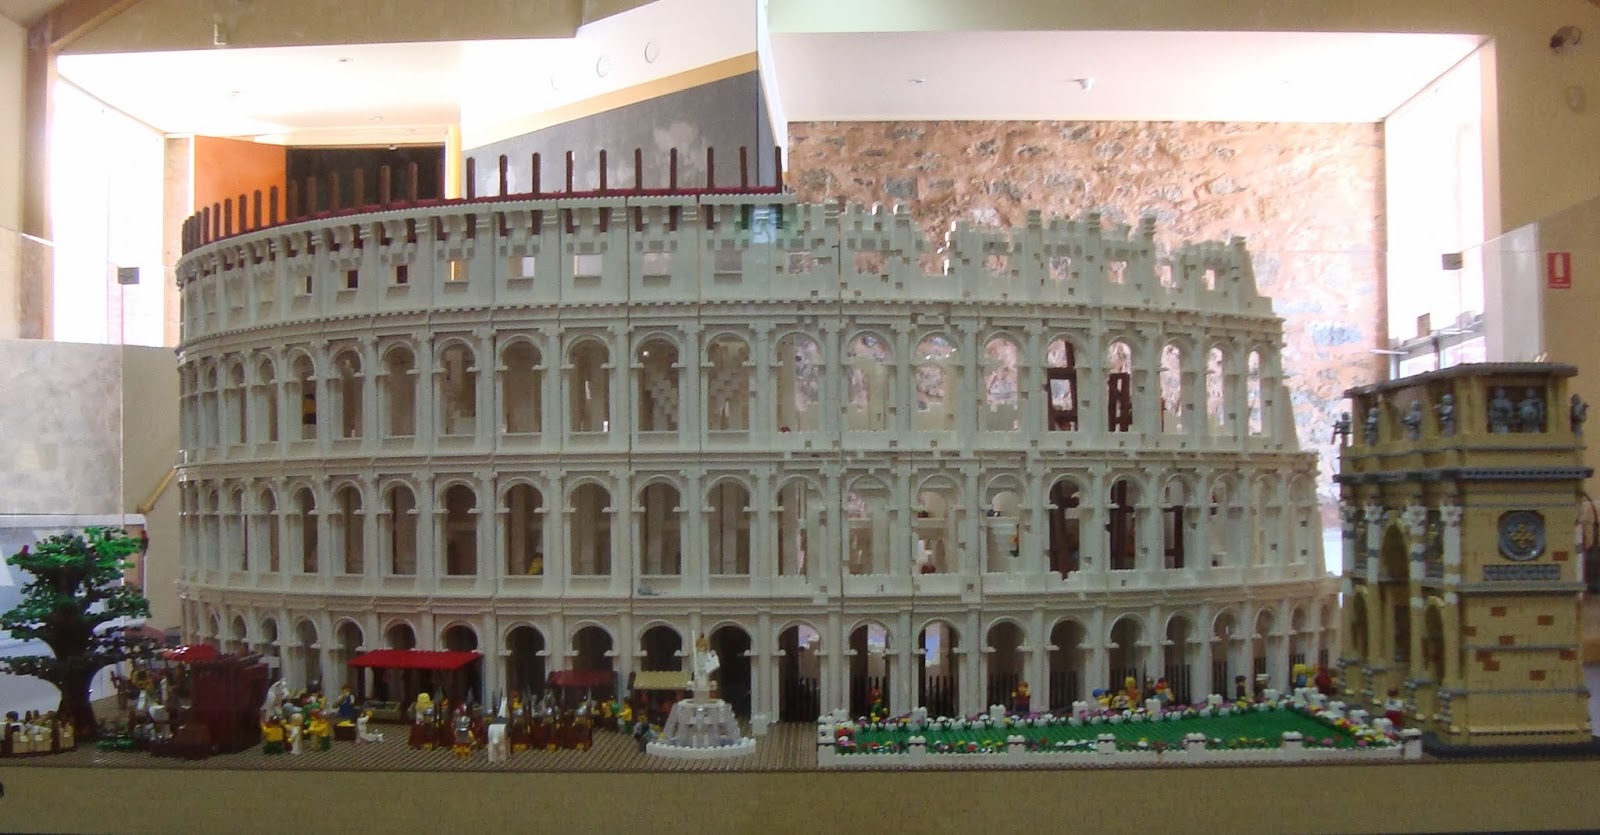 STAFF PICK WHAT’S ON: Lego Colosseum